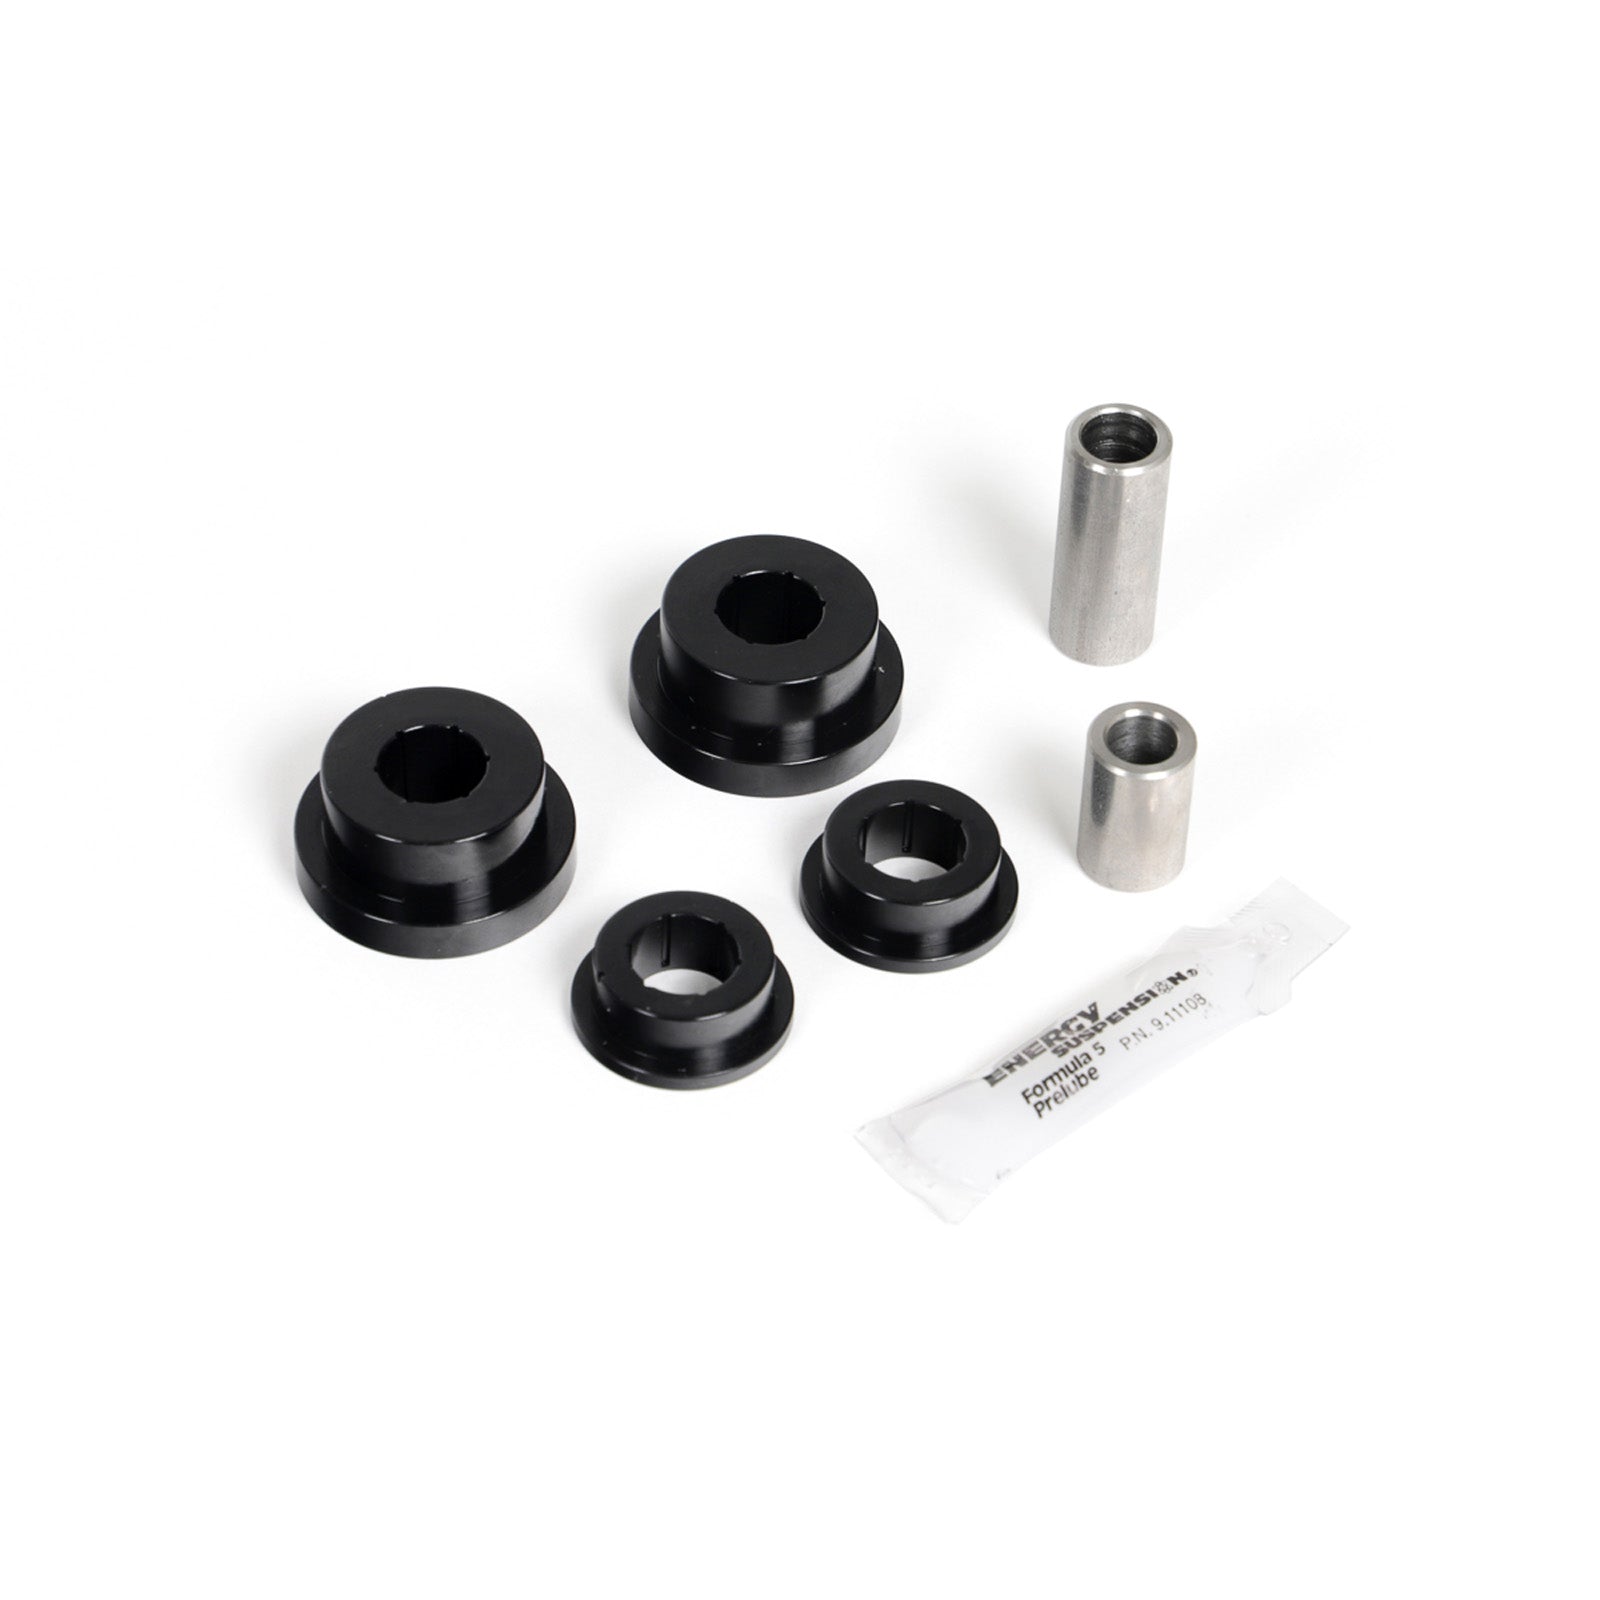 GrimmSpeed Pitch Stop Mount Bushing Kit - 95A Race Version